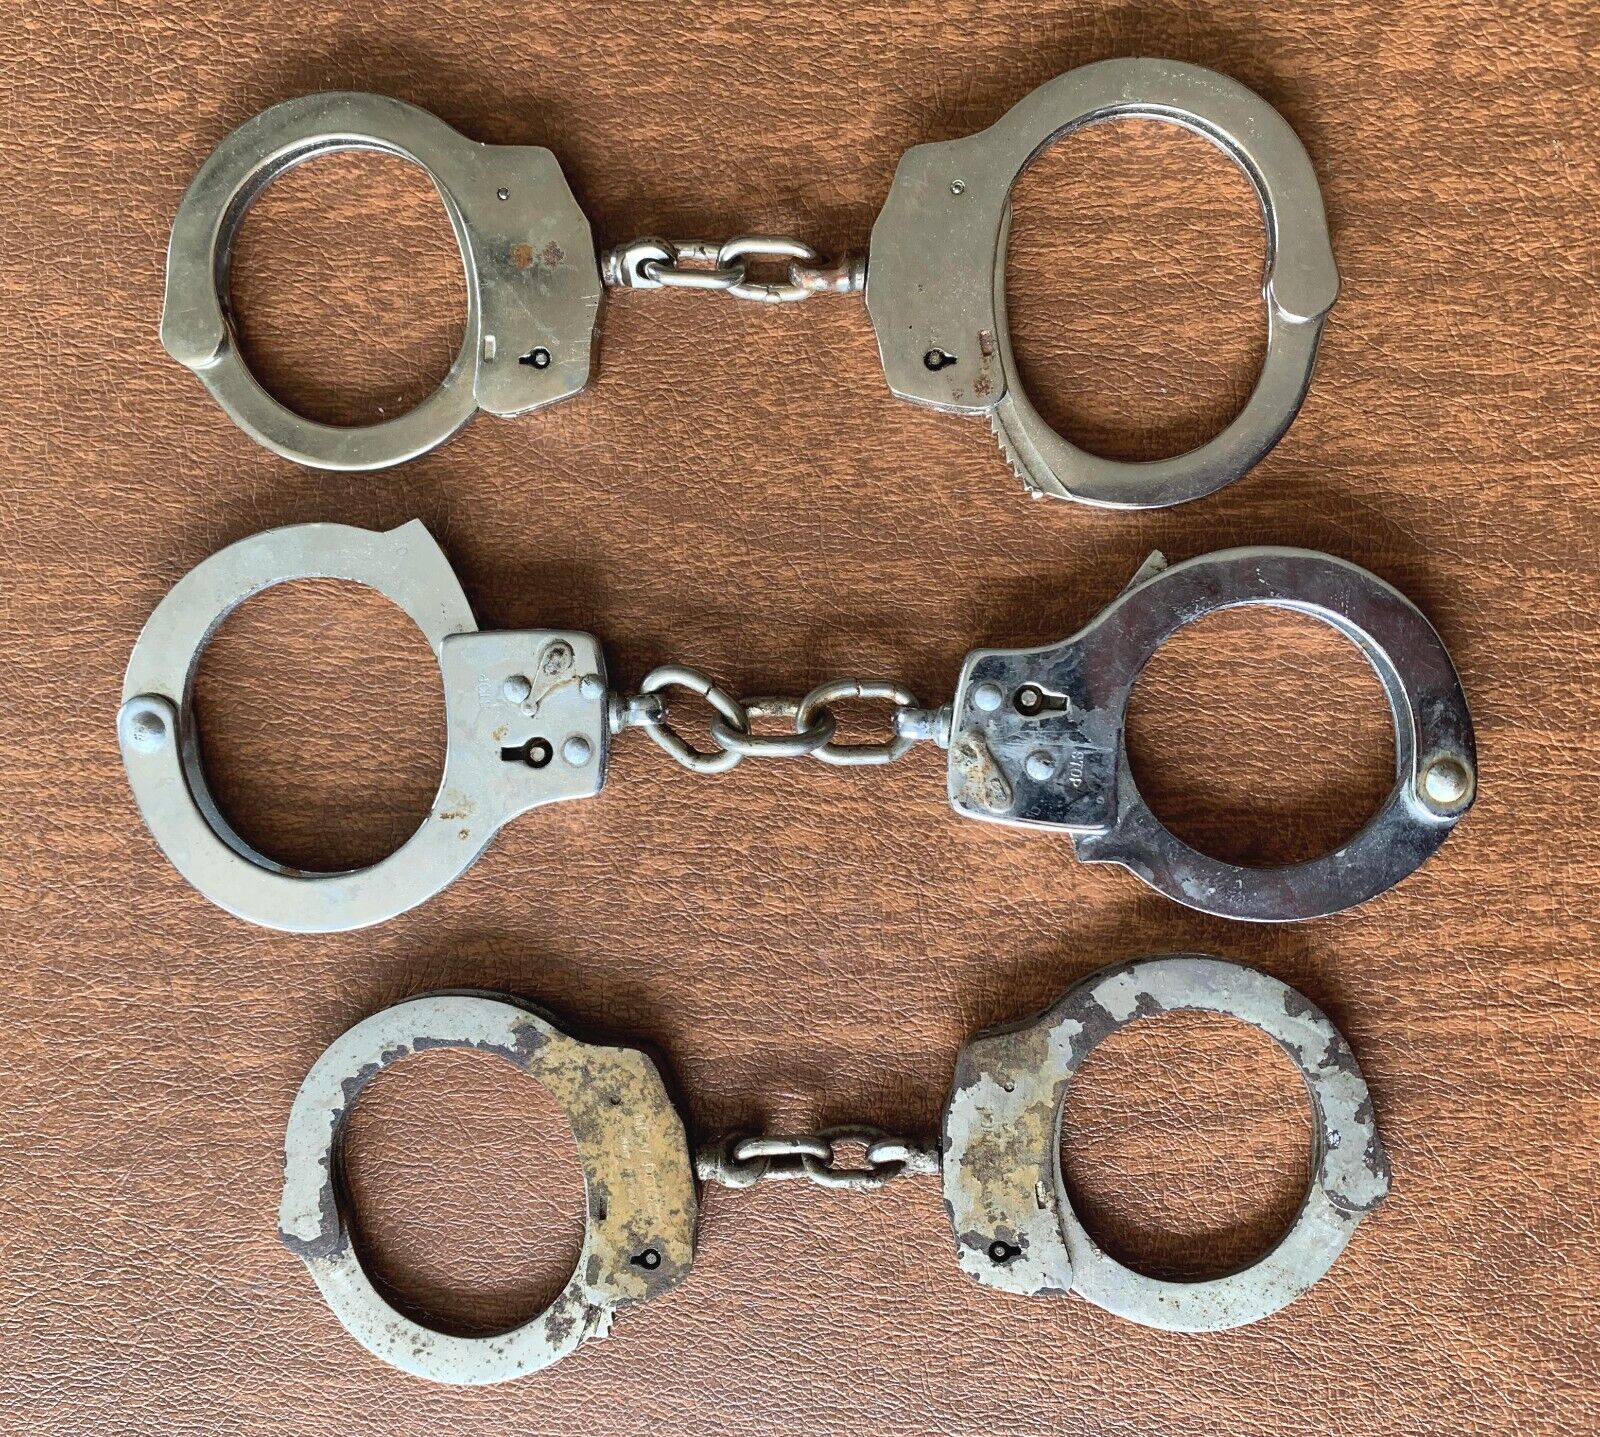 3 sets of real, genuine, authentic handcuffs, of unknown origin, unknown history